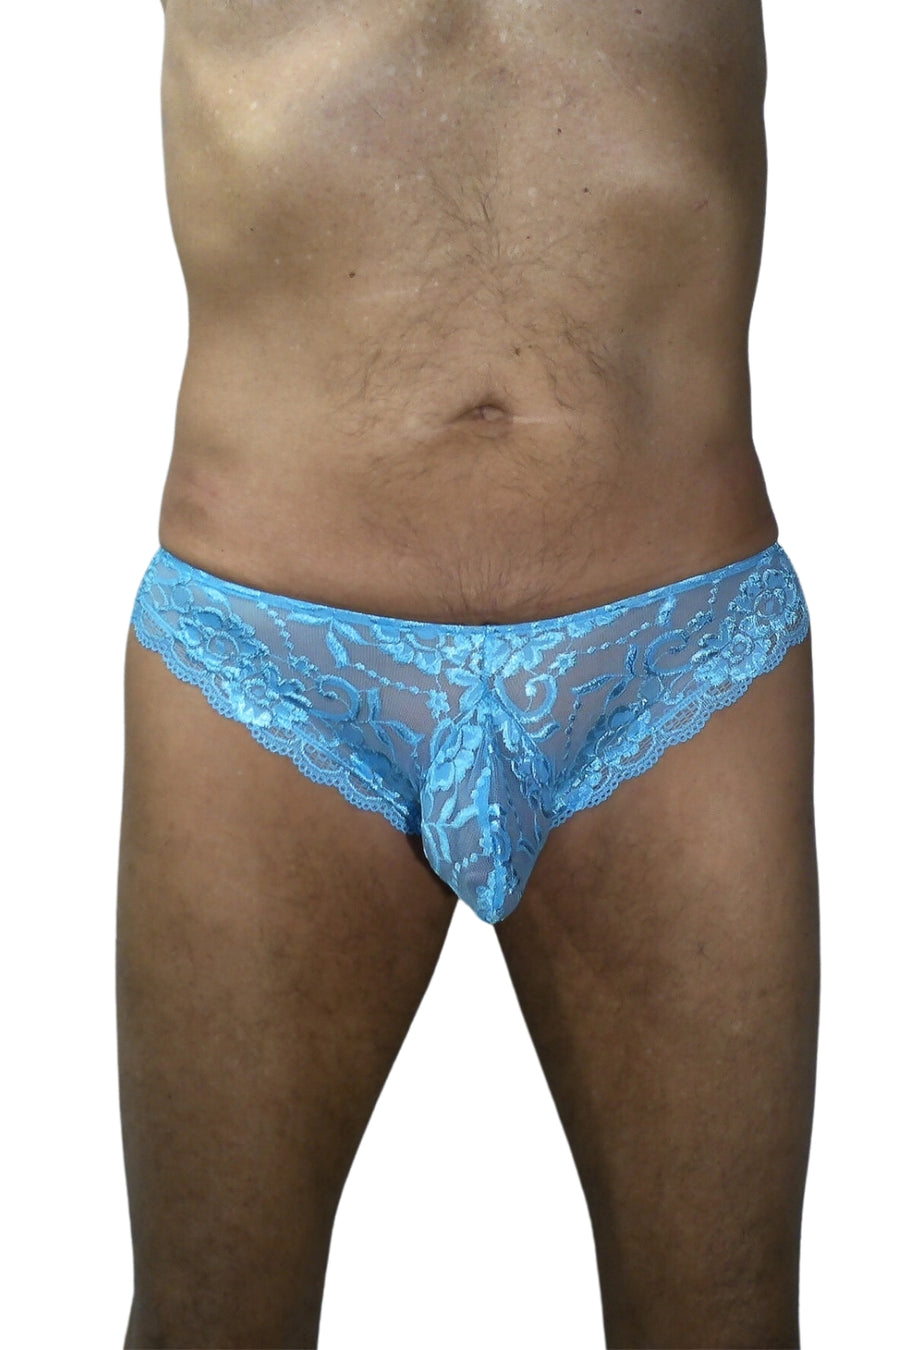 Full front view of Baby Blue Brief. Model is 6'2" 190 pounds, 8 inches cut full shaved around genitals